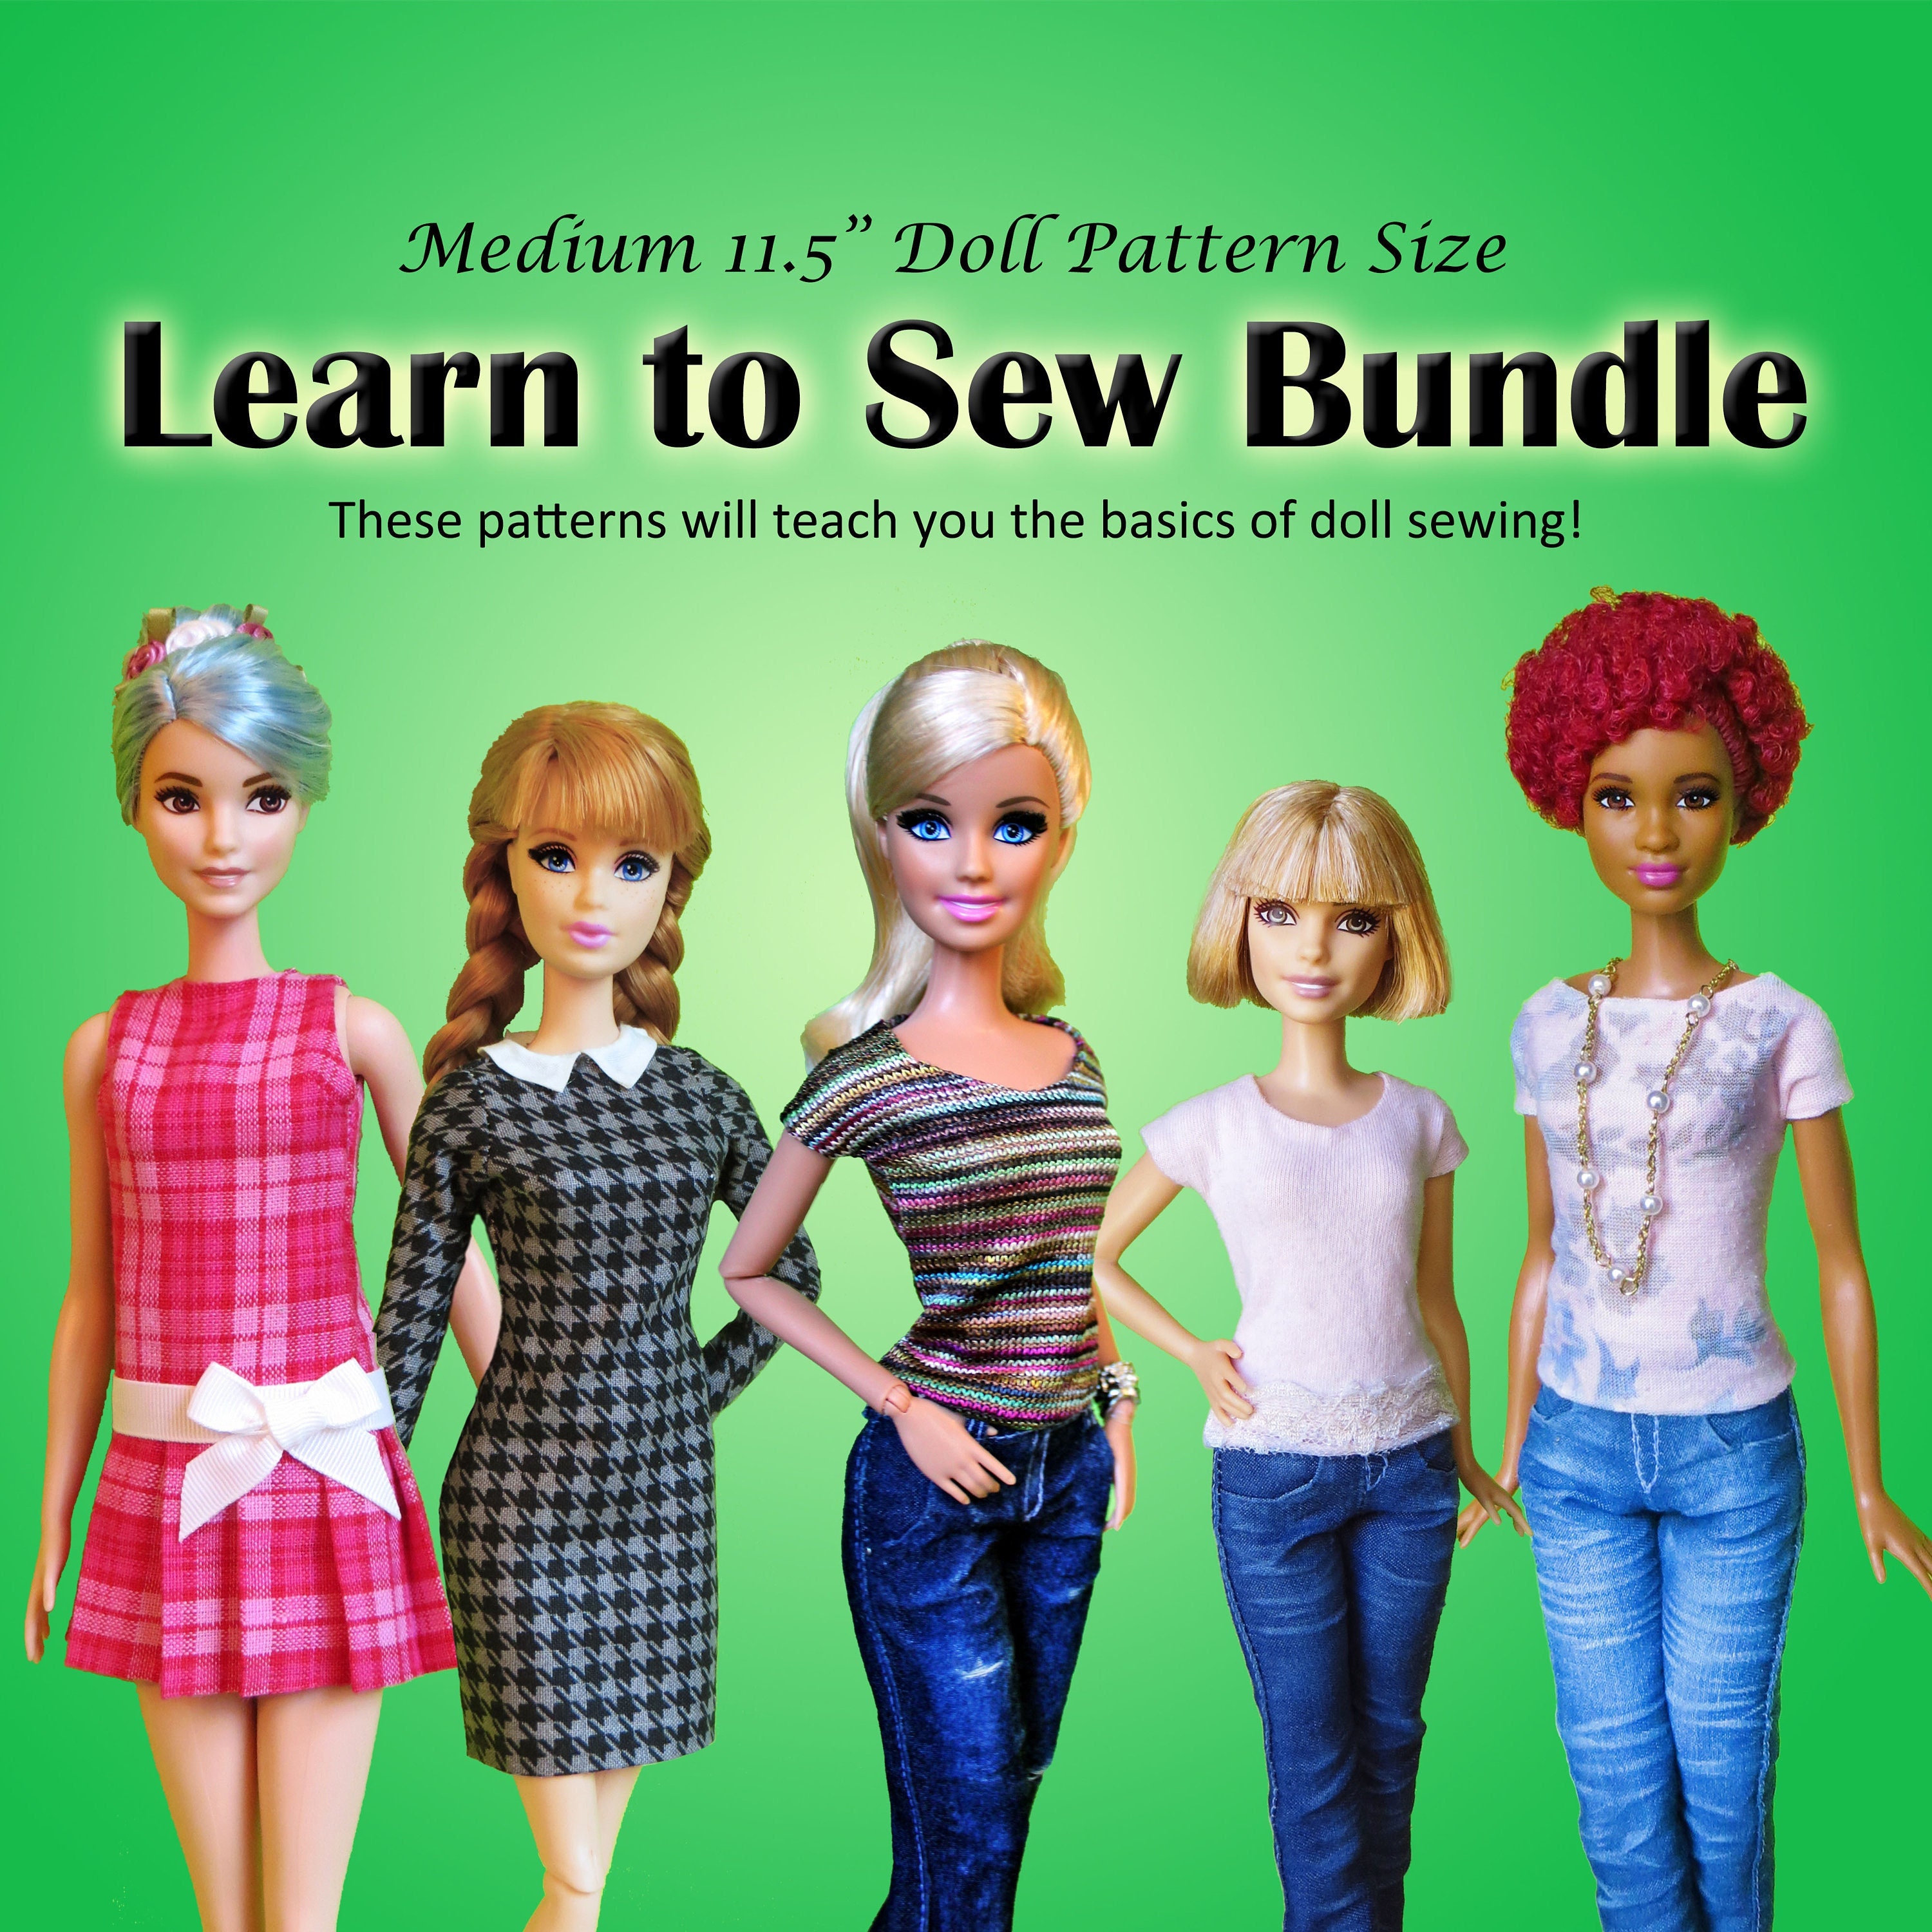 Sewing Patterns for Barbie Clothes, for beginners and beyond — Pin